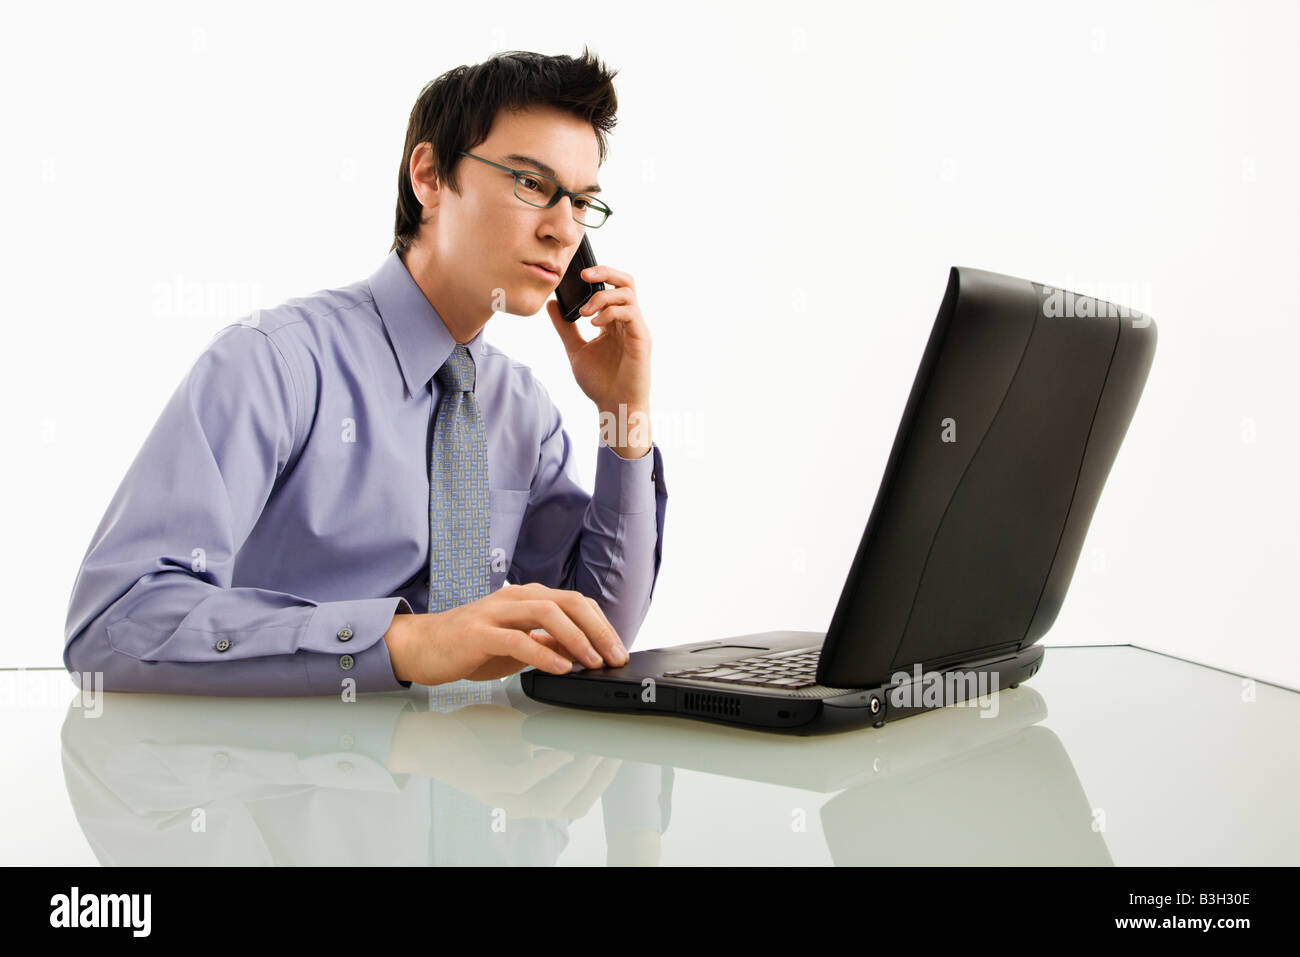 Asian businessman sitting at desk working on laptop talking on cellphone Banque D'Images